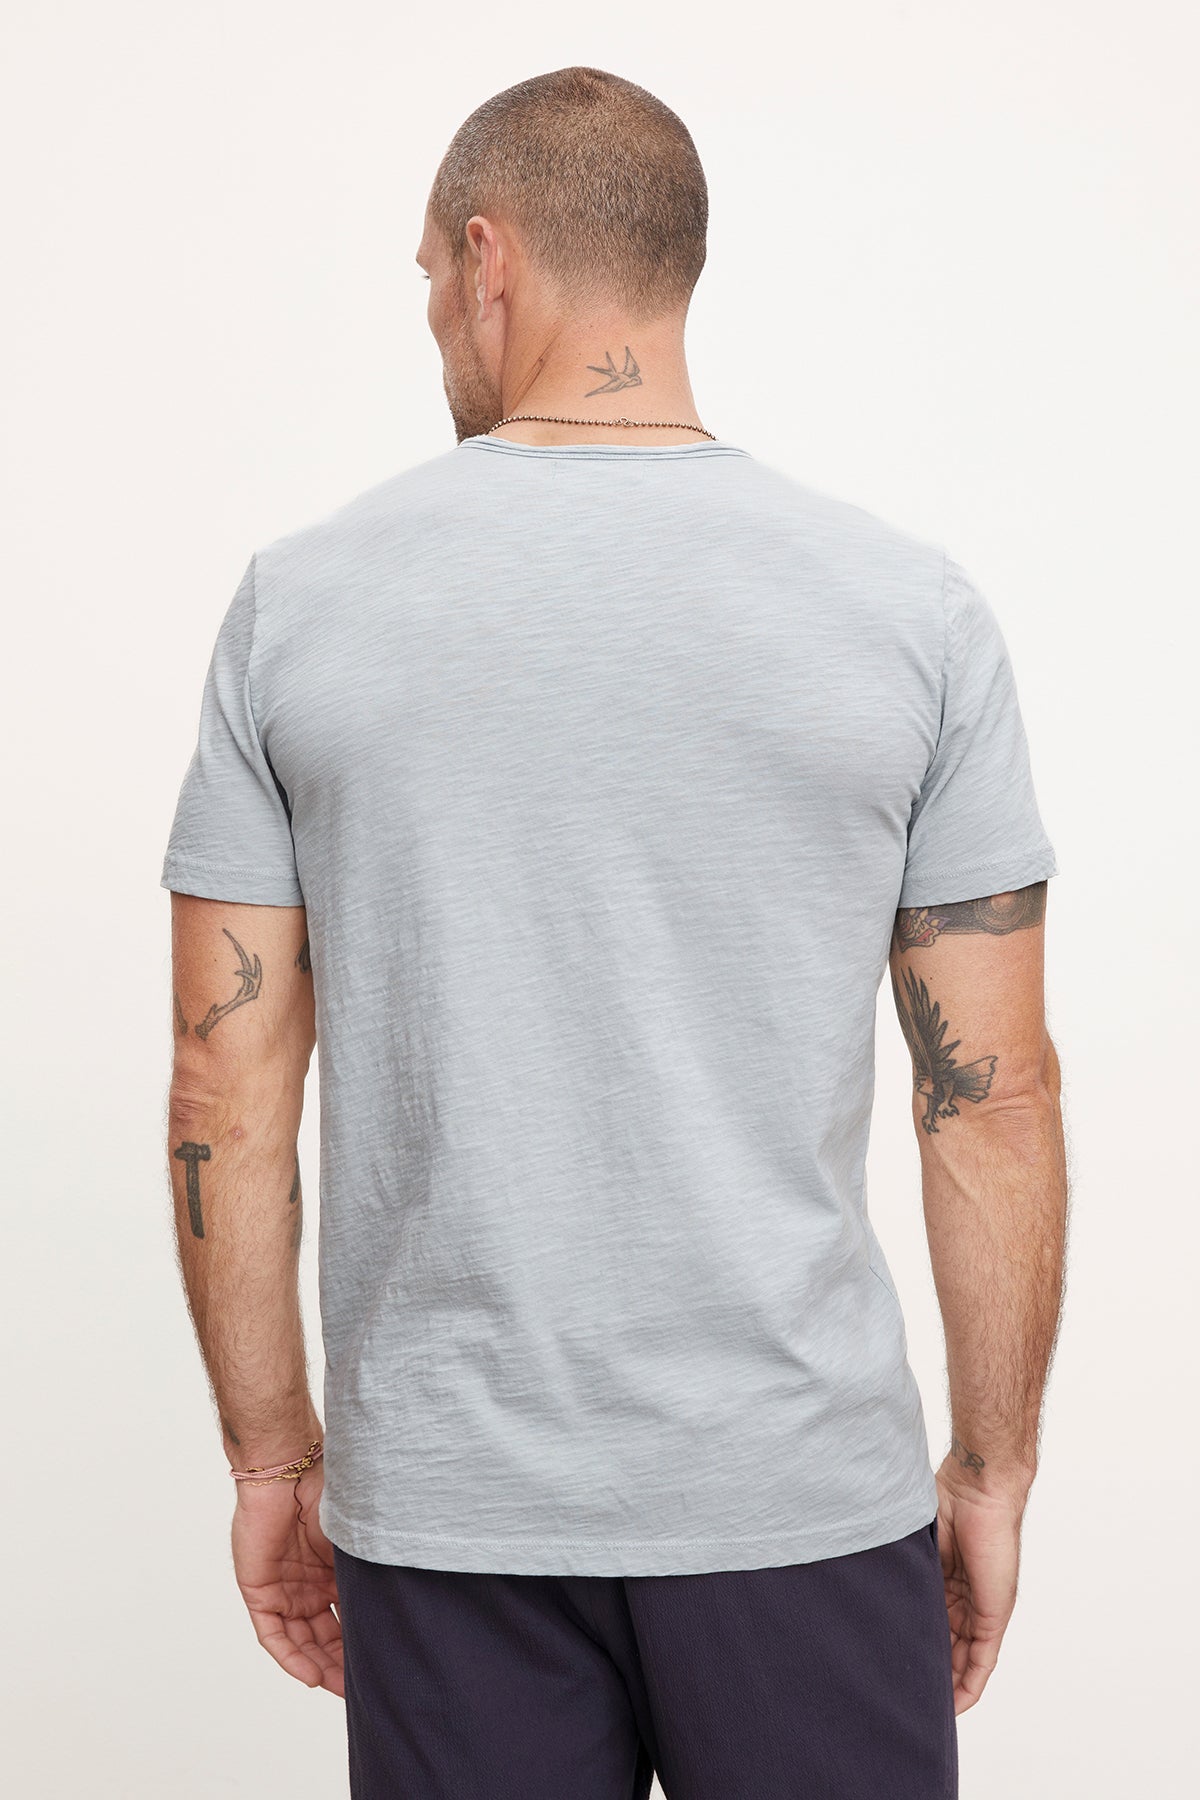 Man standing with his back to the camera showcasing a Velvet by Graham & Spencer CHAD TEE and navy shorts, displaying visible tattoos on his arms and neck.-36890799079617